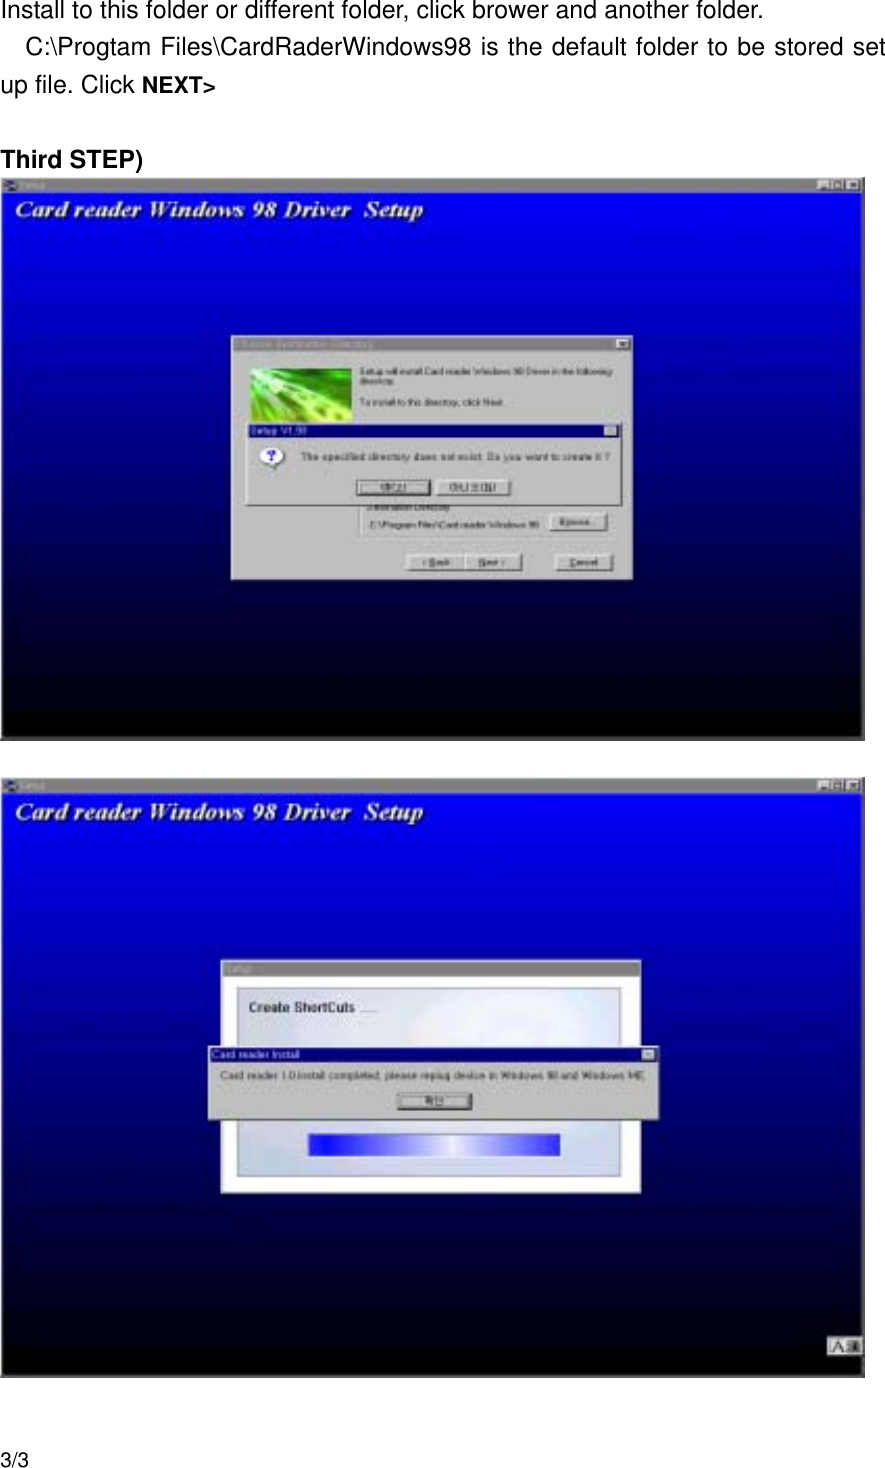   Install to this folder or different folder, click brower and another folder.   C:\Progtam Files\CardRaderWindows98 is the default folder to be stored set up file. Click NEXT&gt;   Third STEP)                                                                      3/3 